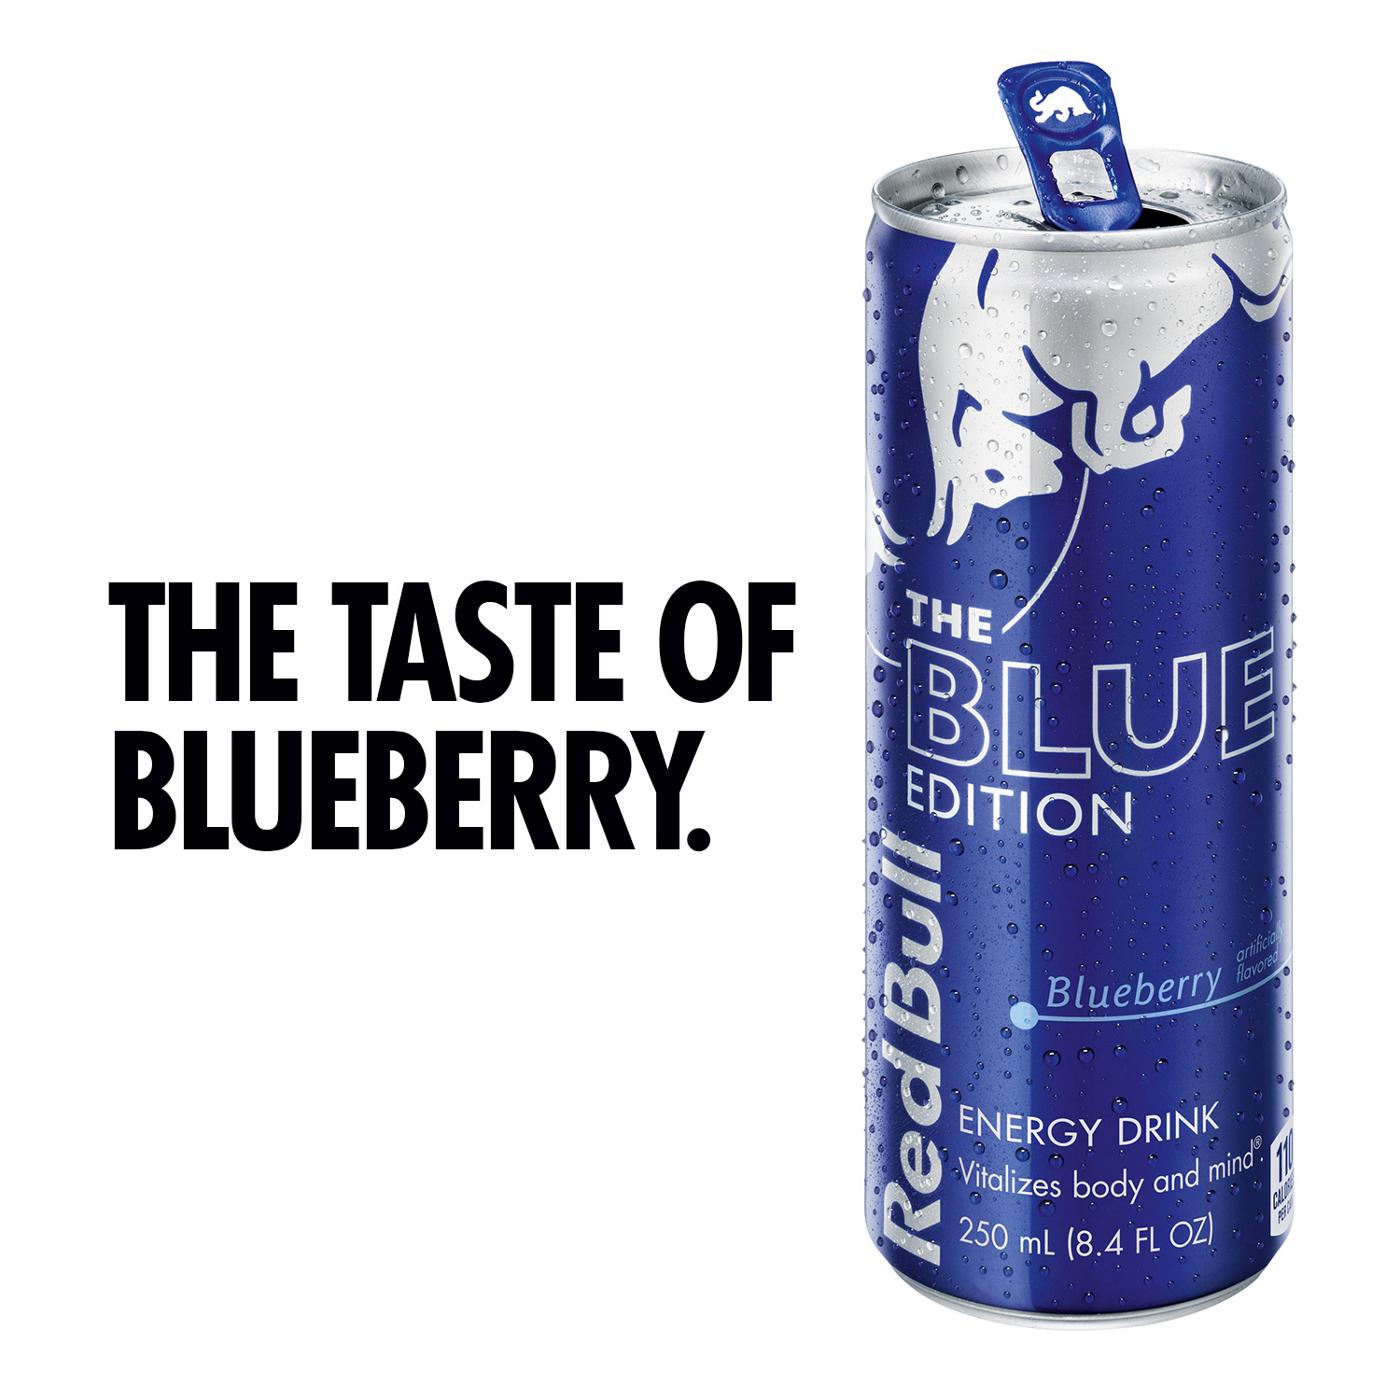 Red Bull The Blue Edition Blueberry Energy Drink 12 oz Cans; image 2 of 5